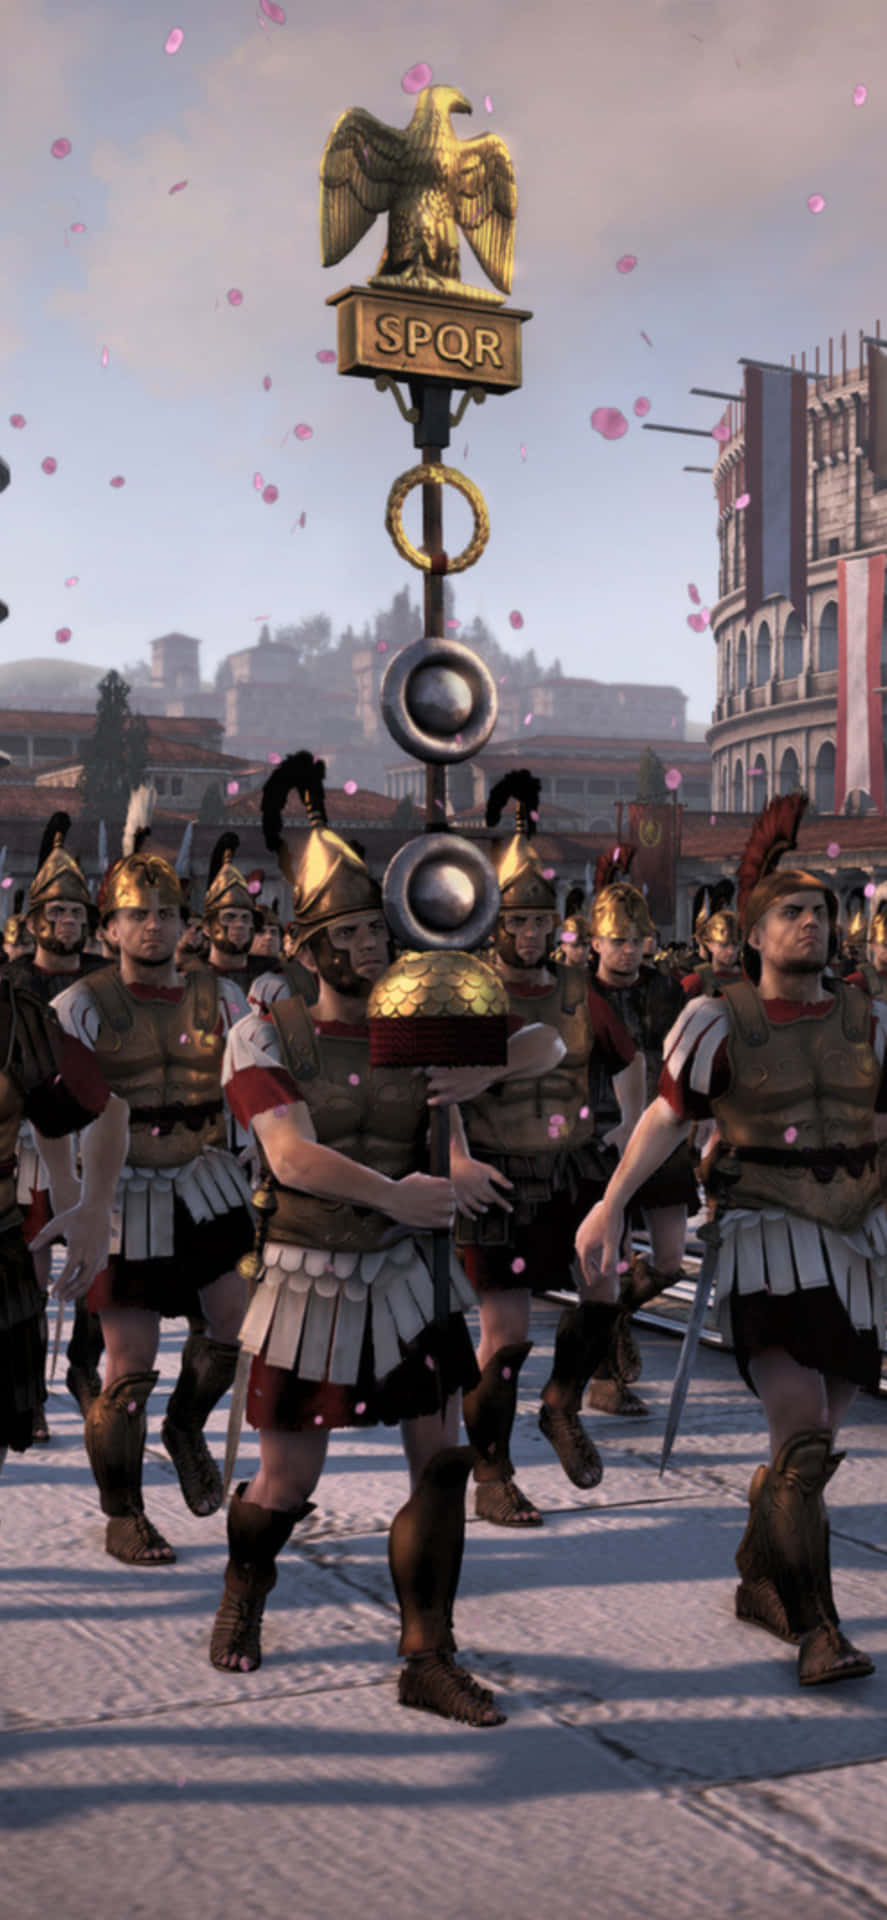 A Group Of People In Roman Costumes Are Walking Down The Street